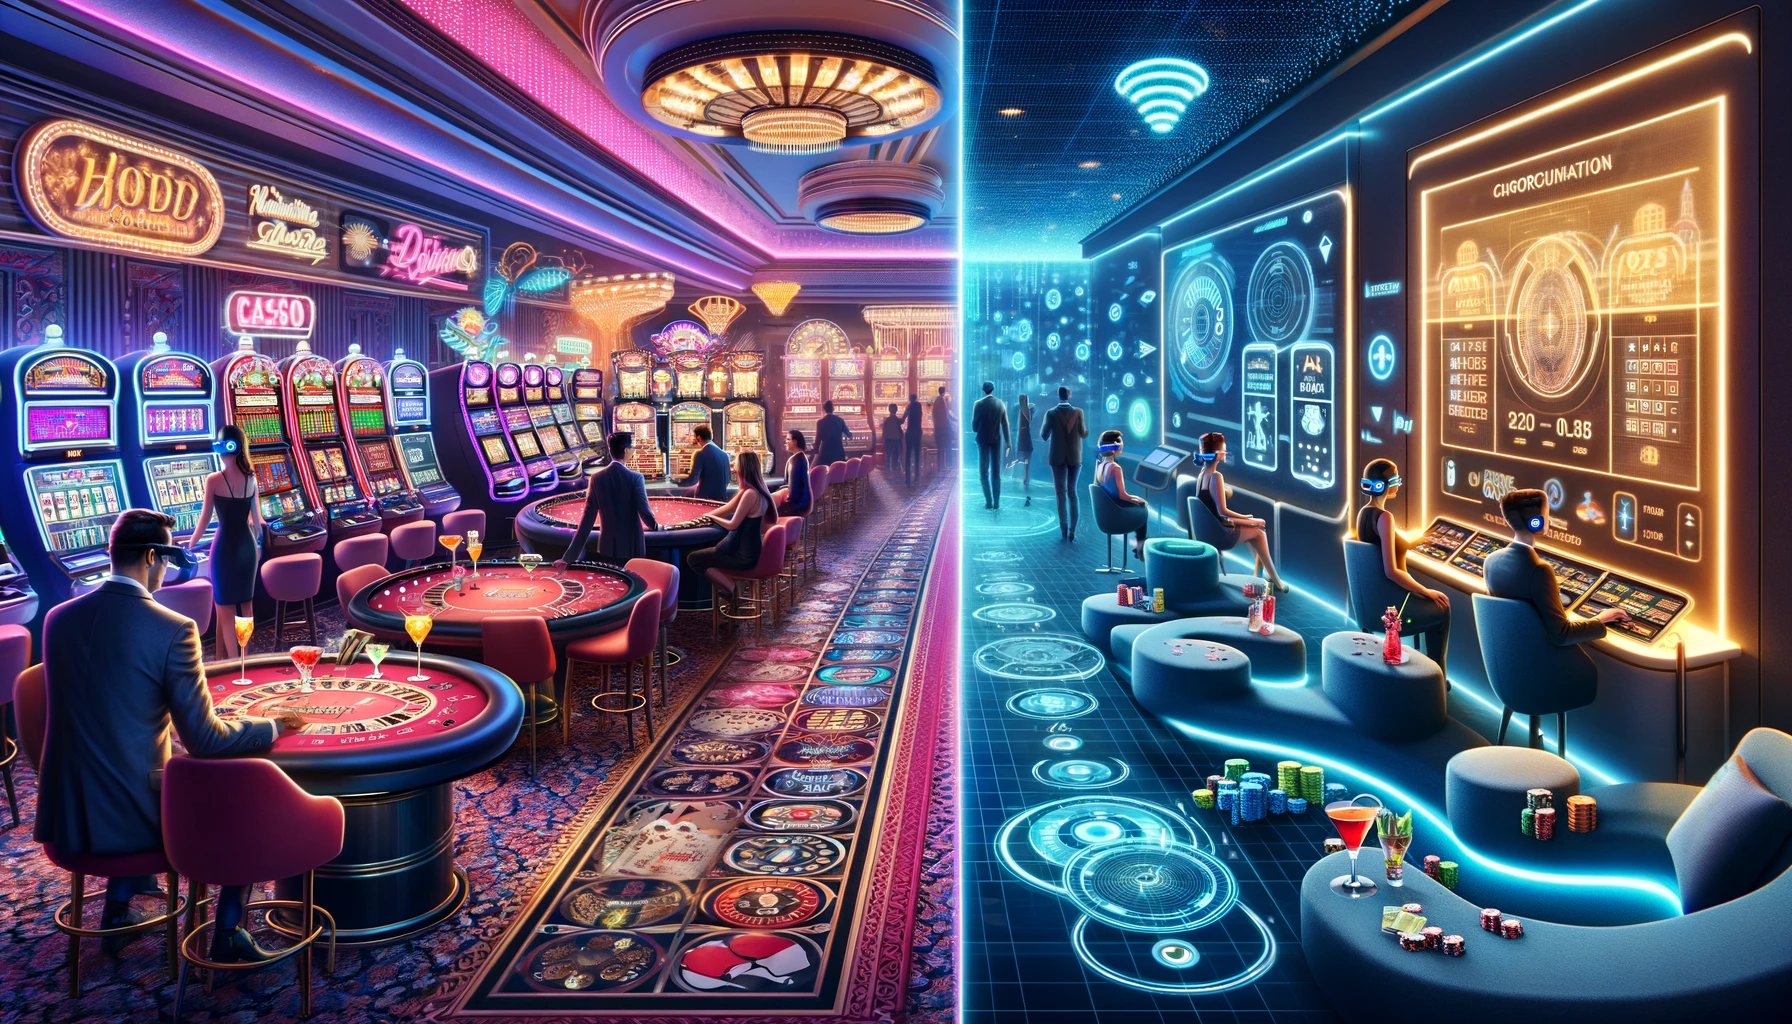 A split image of a classic casino with slot machines and poker tables on the left, and a futuristic casino with AR headsets, holographic games, and AI-powered features on the right.